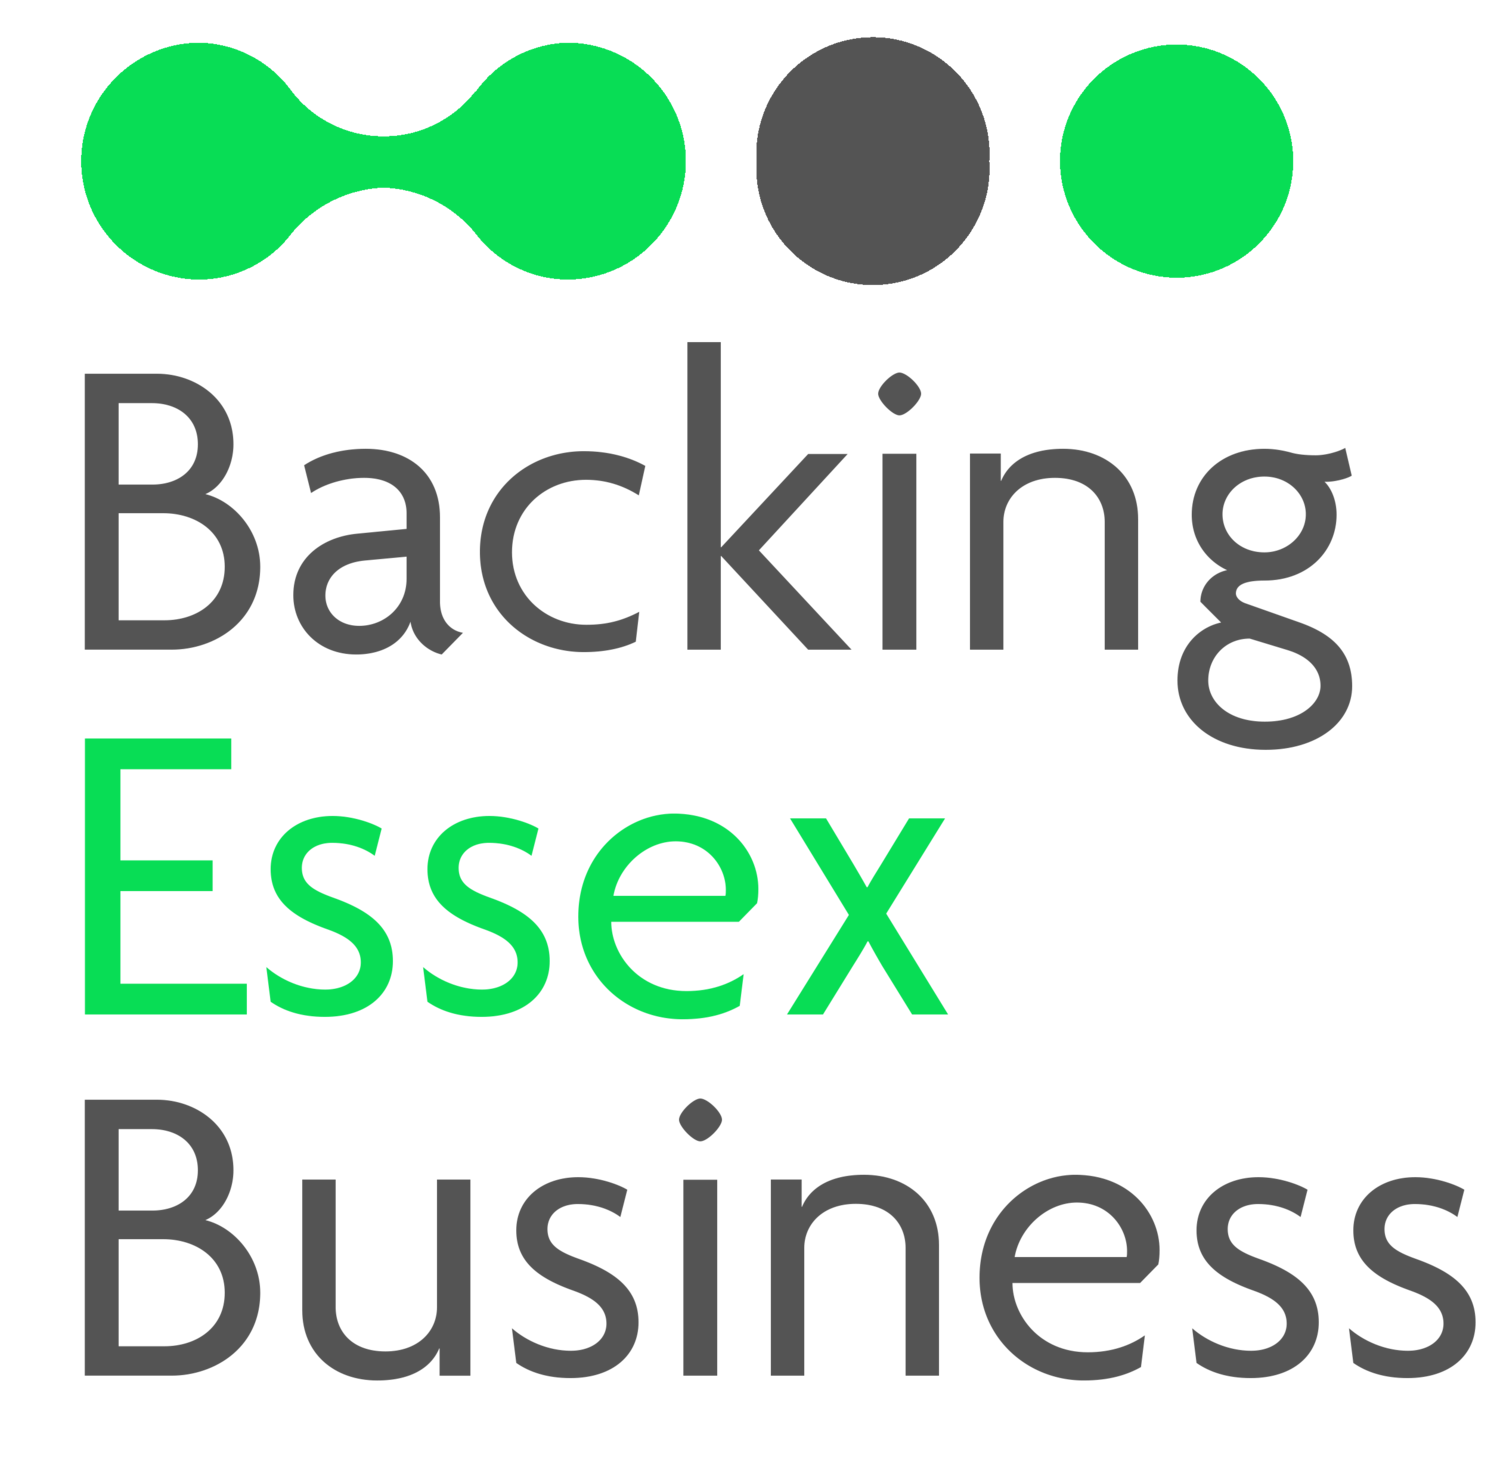 Backing Essex Business